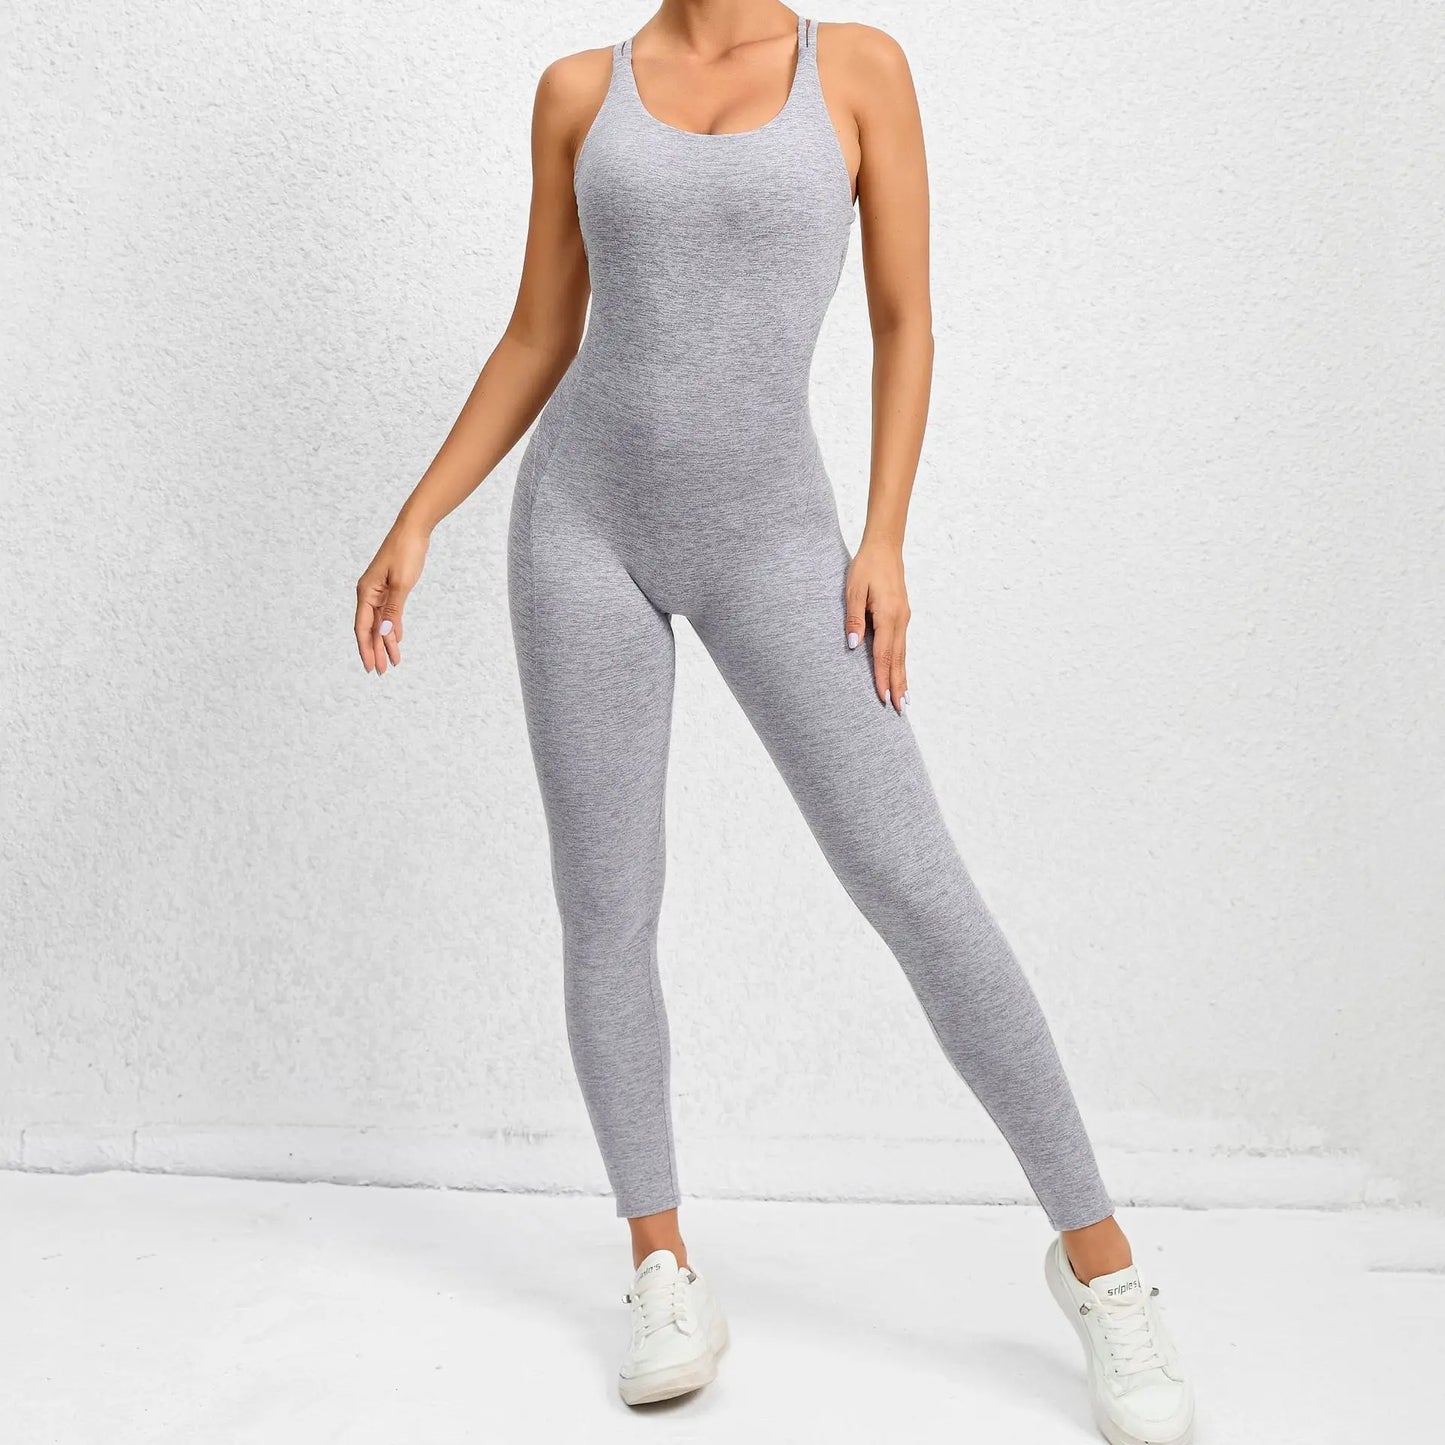 One Piece Backless Bodycon Scrunch Jumpsuit Women Dance Fitness Overalls Push Up Sleeveless Yoga Sport Jump Suit The Clothing Company Sydney